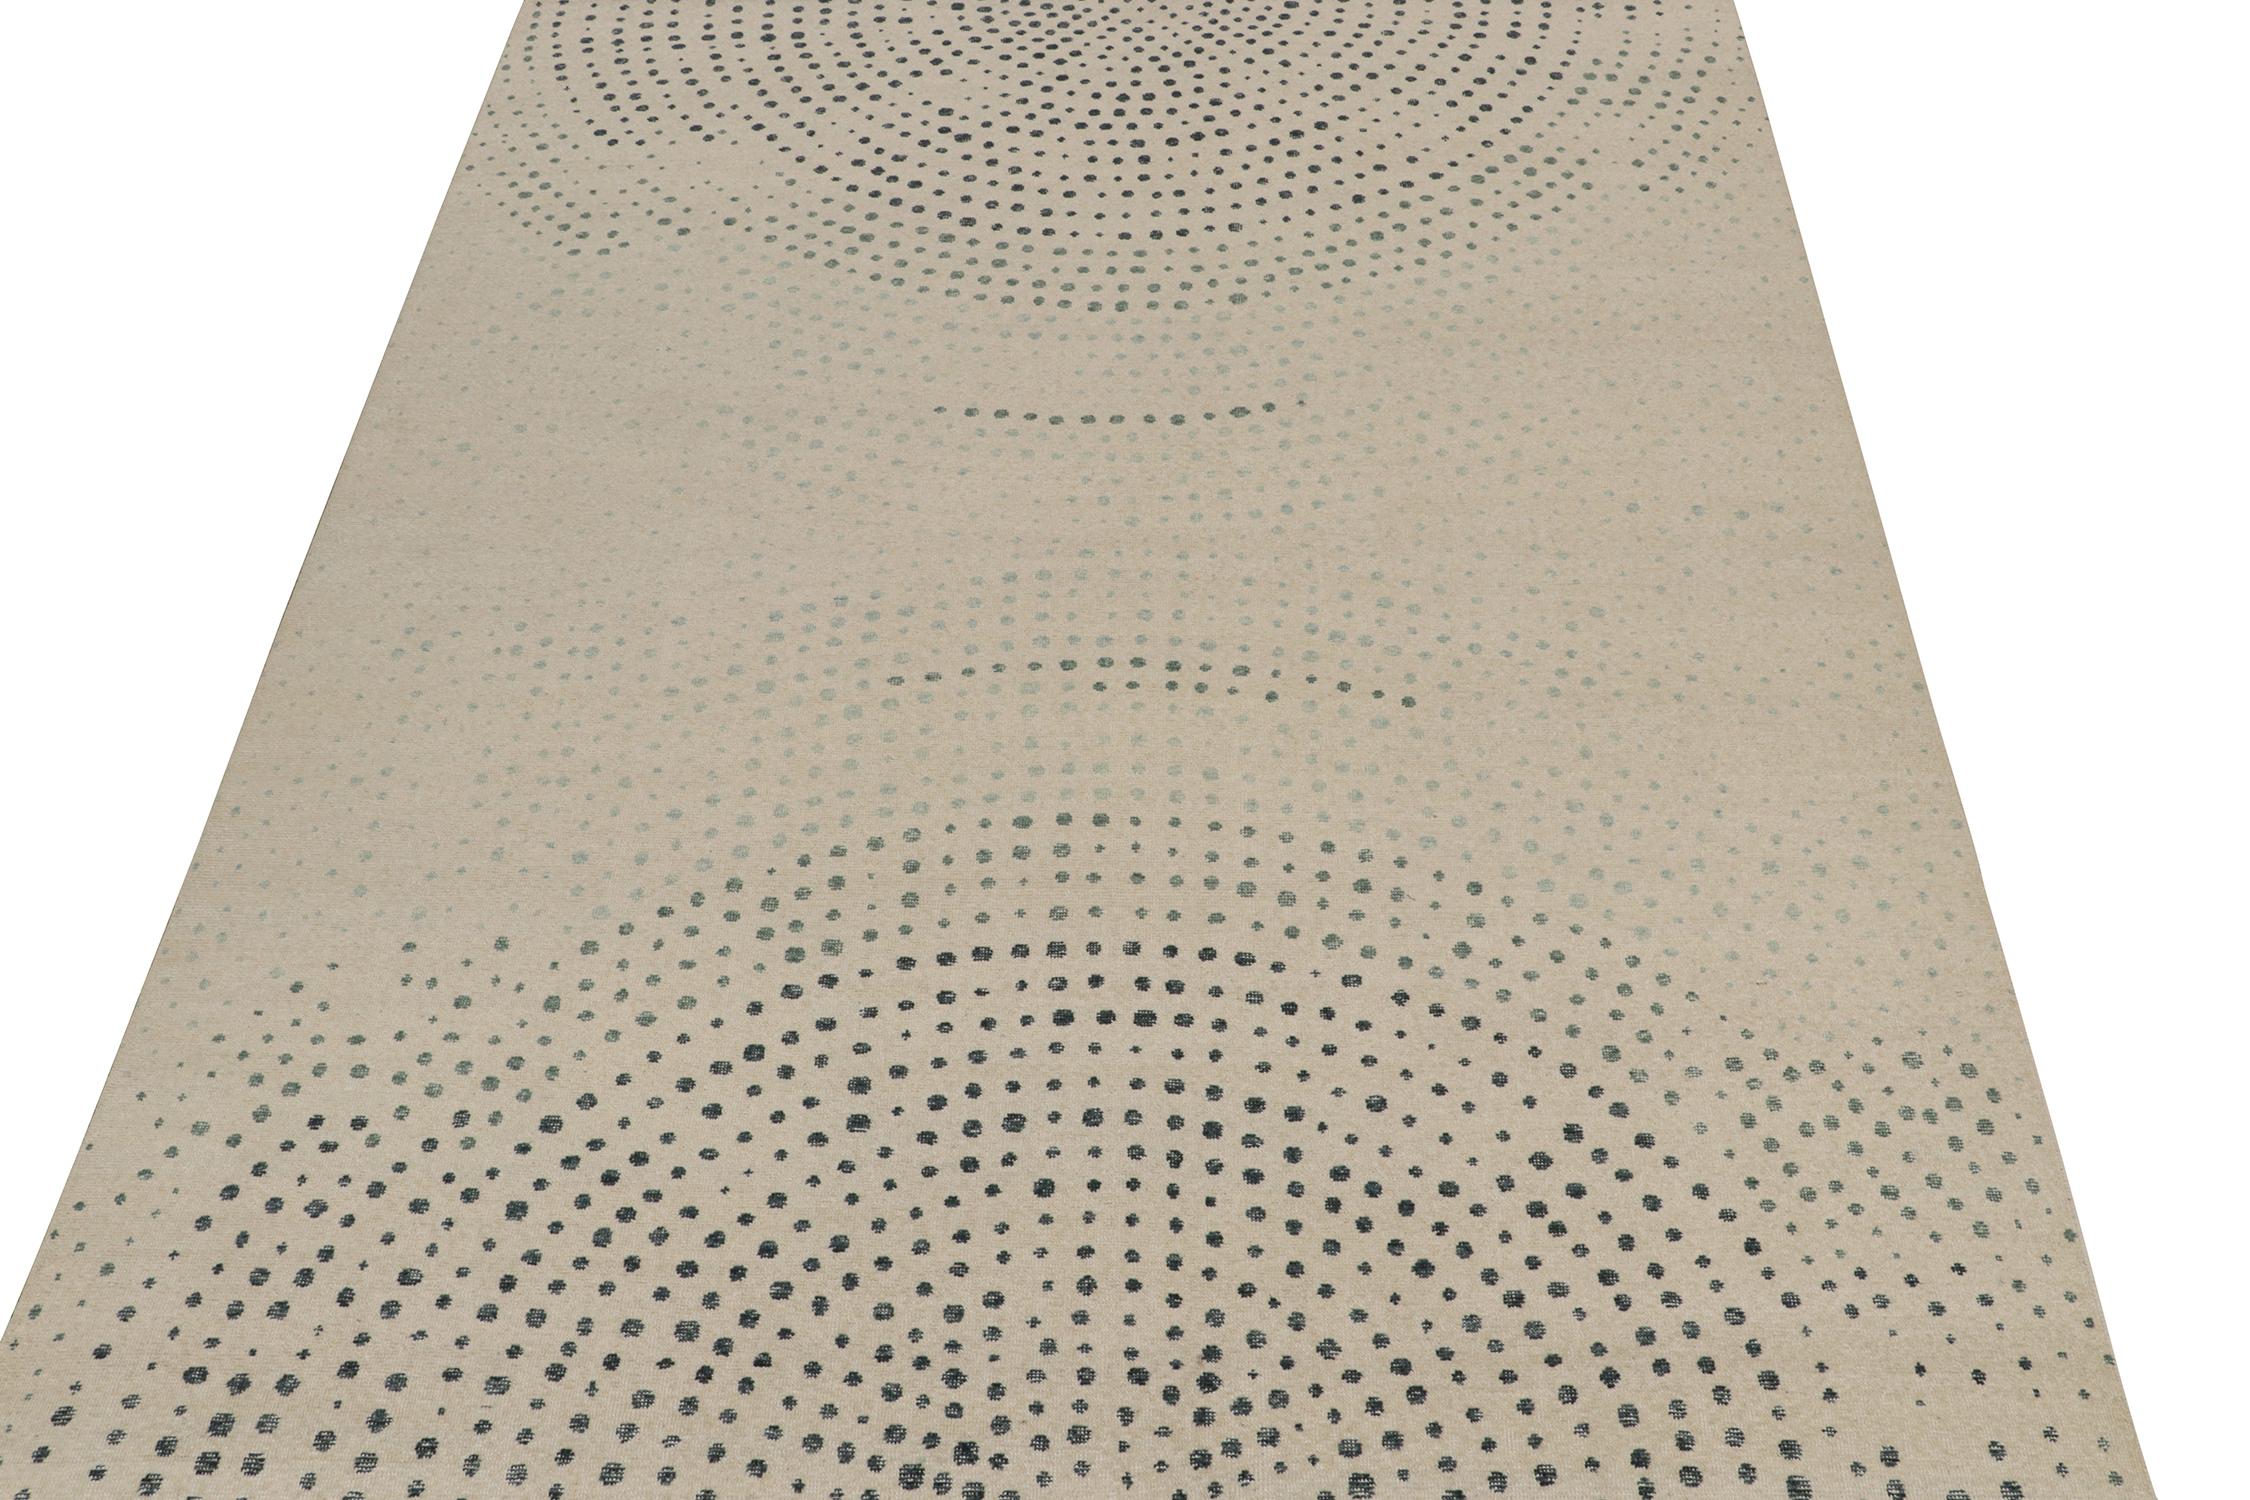 Modern Rug & Kilim’s Distressed Style Abstract Rug in Beige, Blue & Green Dots Patterns For Sale